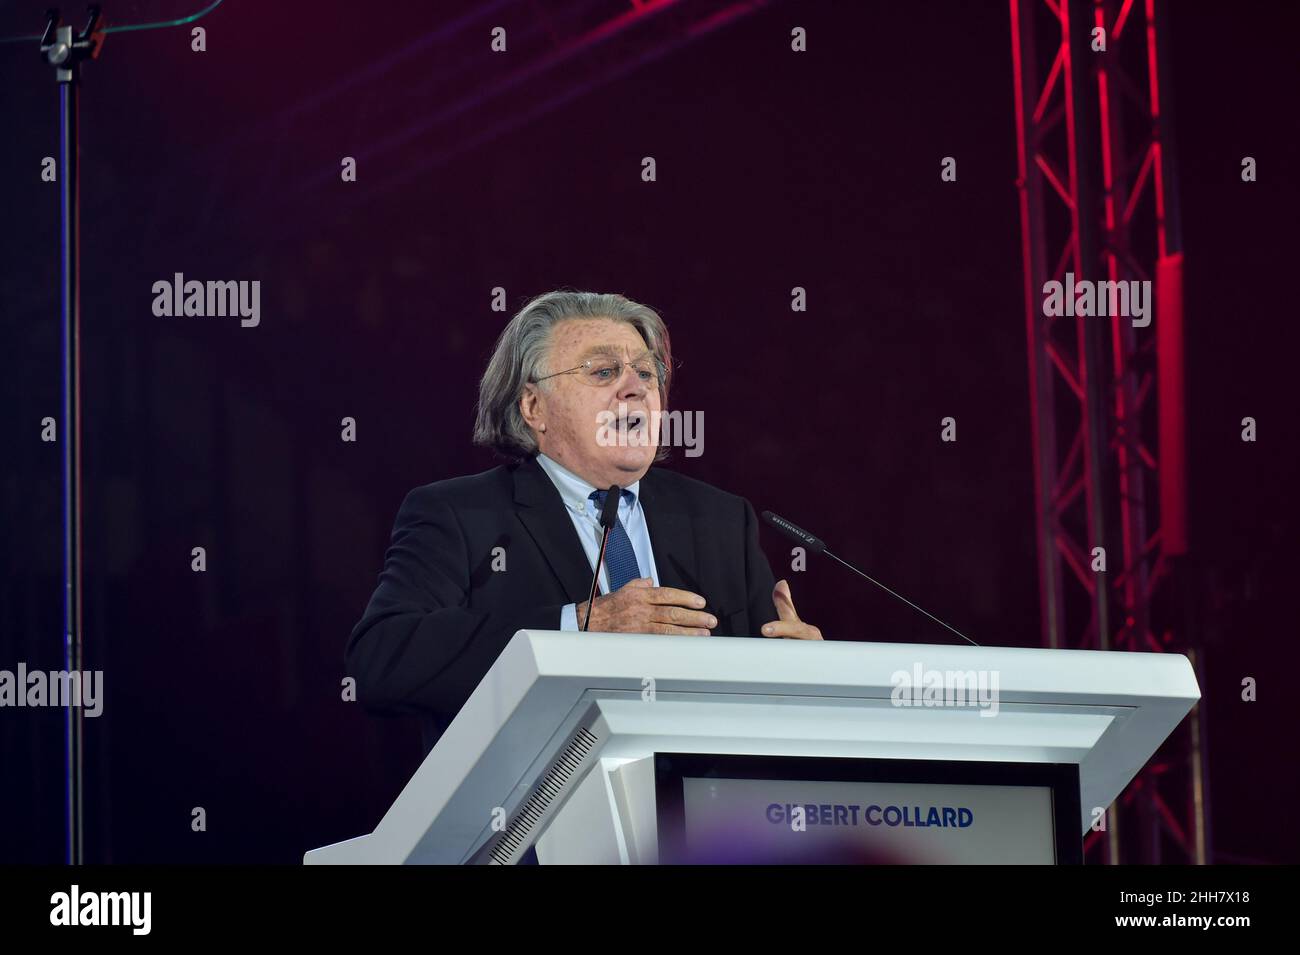 Gilbert Collard, a former member of the Rassemblement National, seen delivering his speech in support of Eric Zemmour at the opening of the meeting after announcing his departure from the RN party of Marine Le Pen.Eric Zemmour held an election campaign meeting at the Palais des Libertes in Cannes, during which he presented the new figures of the right who have joined his party called 'reconquete! He insisted in his will to make the union of the right, the only way he says to win the elections and promises that new members of other right-wing parties will join his political movement. (Photo by Stock Photo